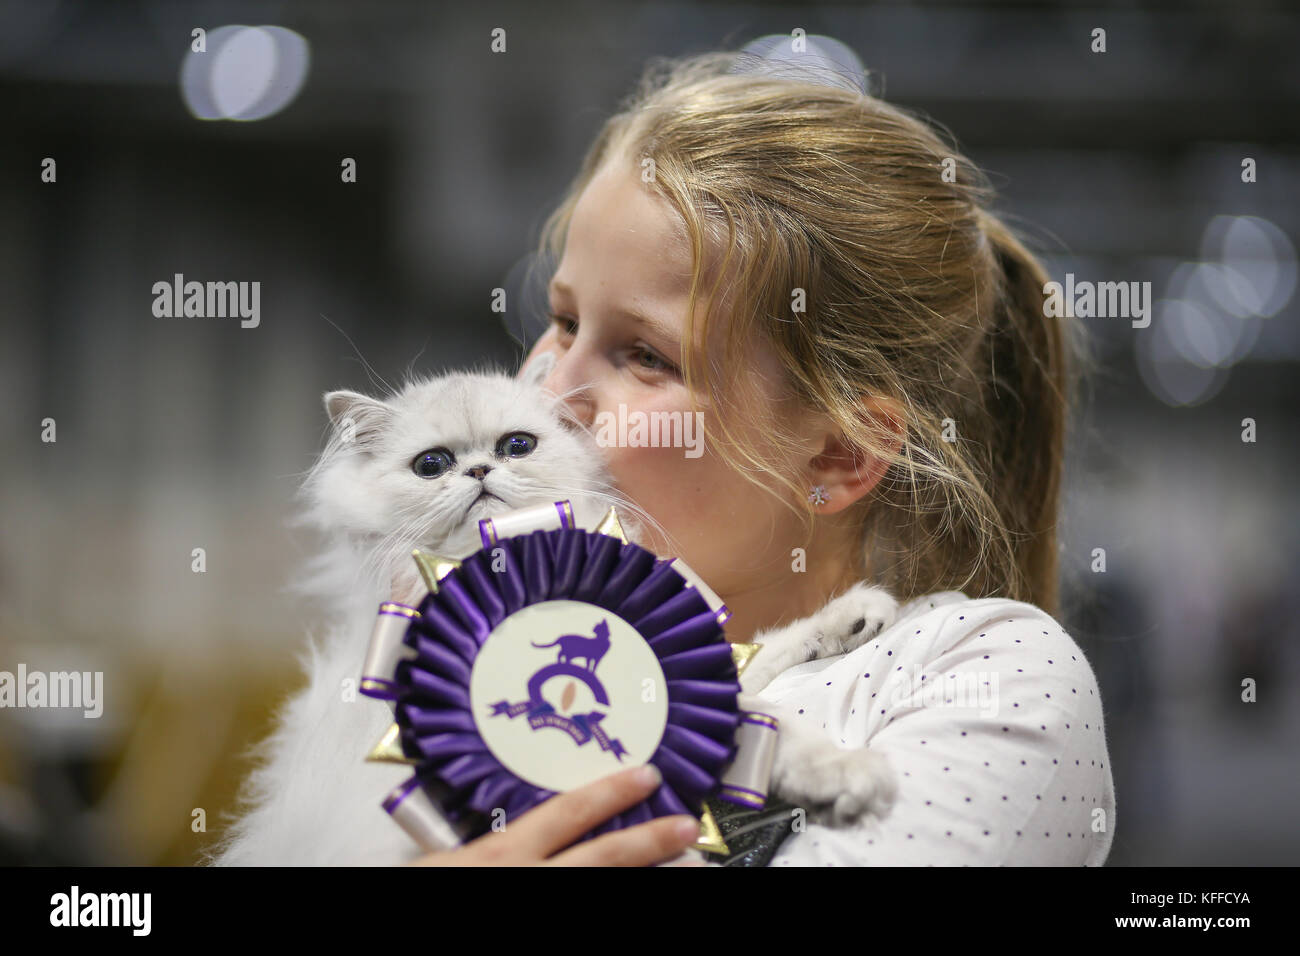 Birmingham, UK. 28th October 2017. Cats and their owners descend on the NEC to show their pedigree bred cats. 8-year-old Nicole Gibson with her prize-winning kitten Emporiums Starlight.   Peter Lopeman/Alamy Live News Stock Photo